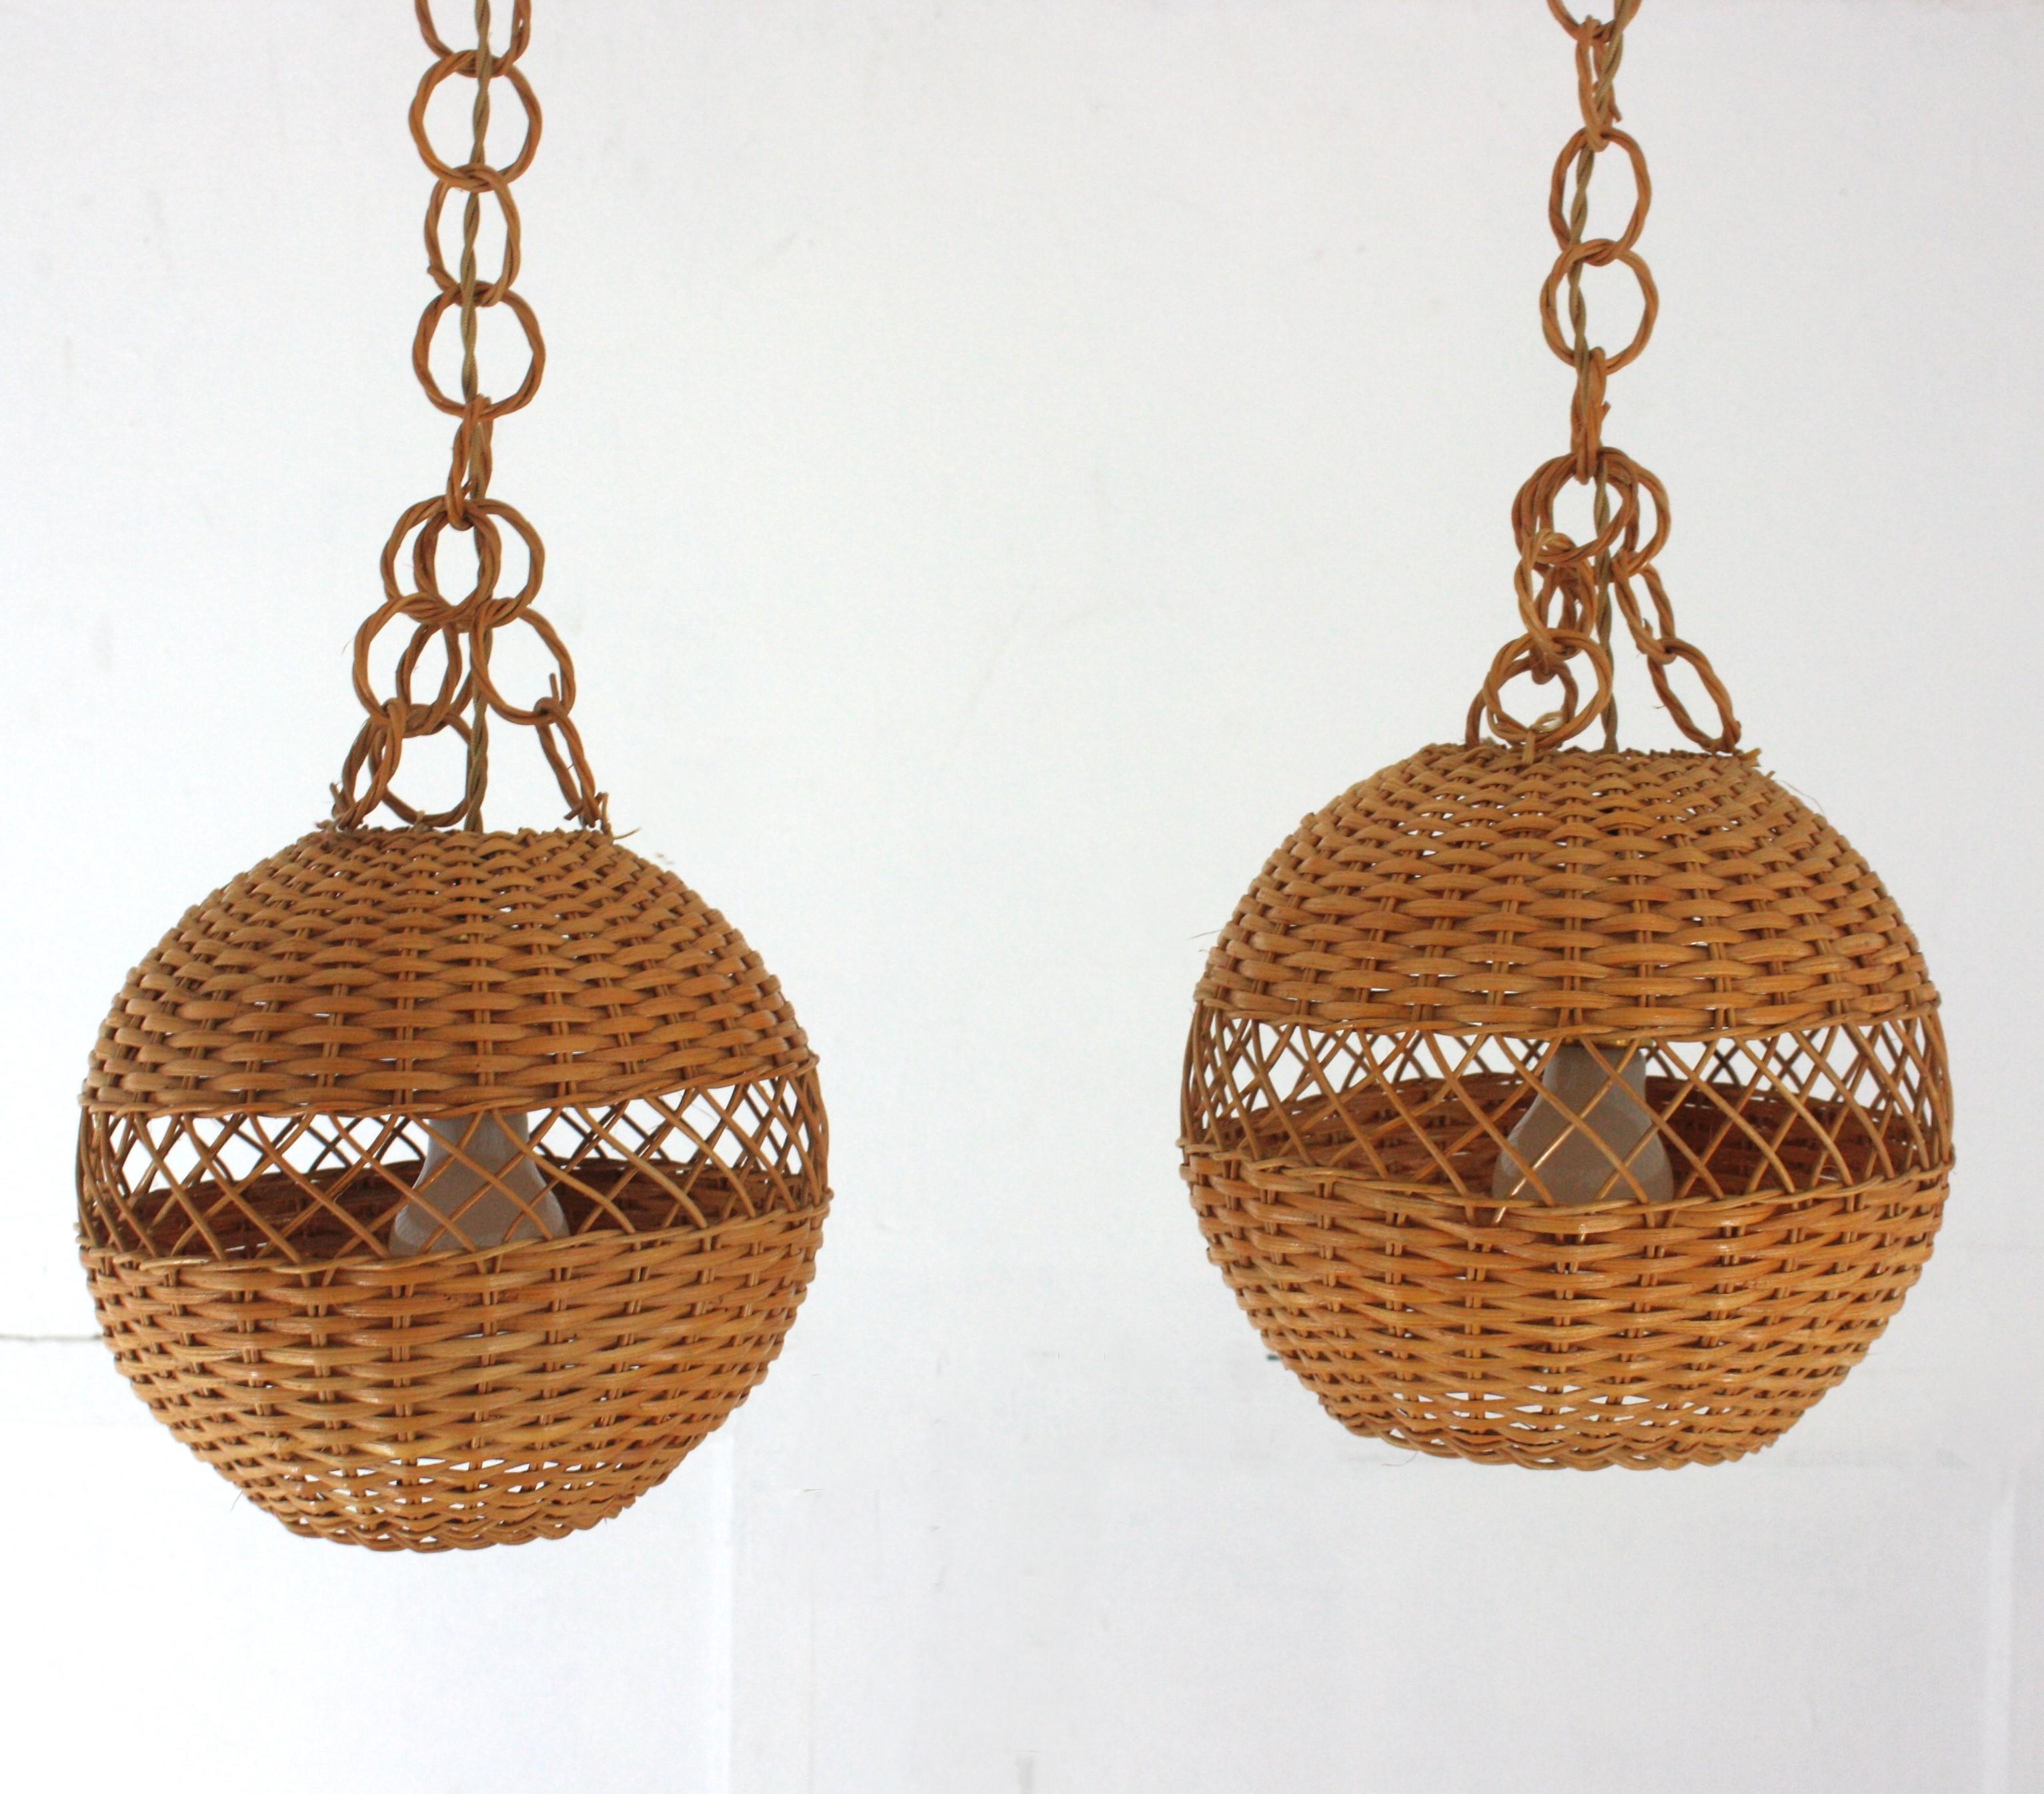 Pair of Handwoven Wicker Globe Pendant Lights or Lanterns For Sale 9